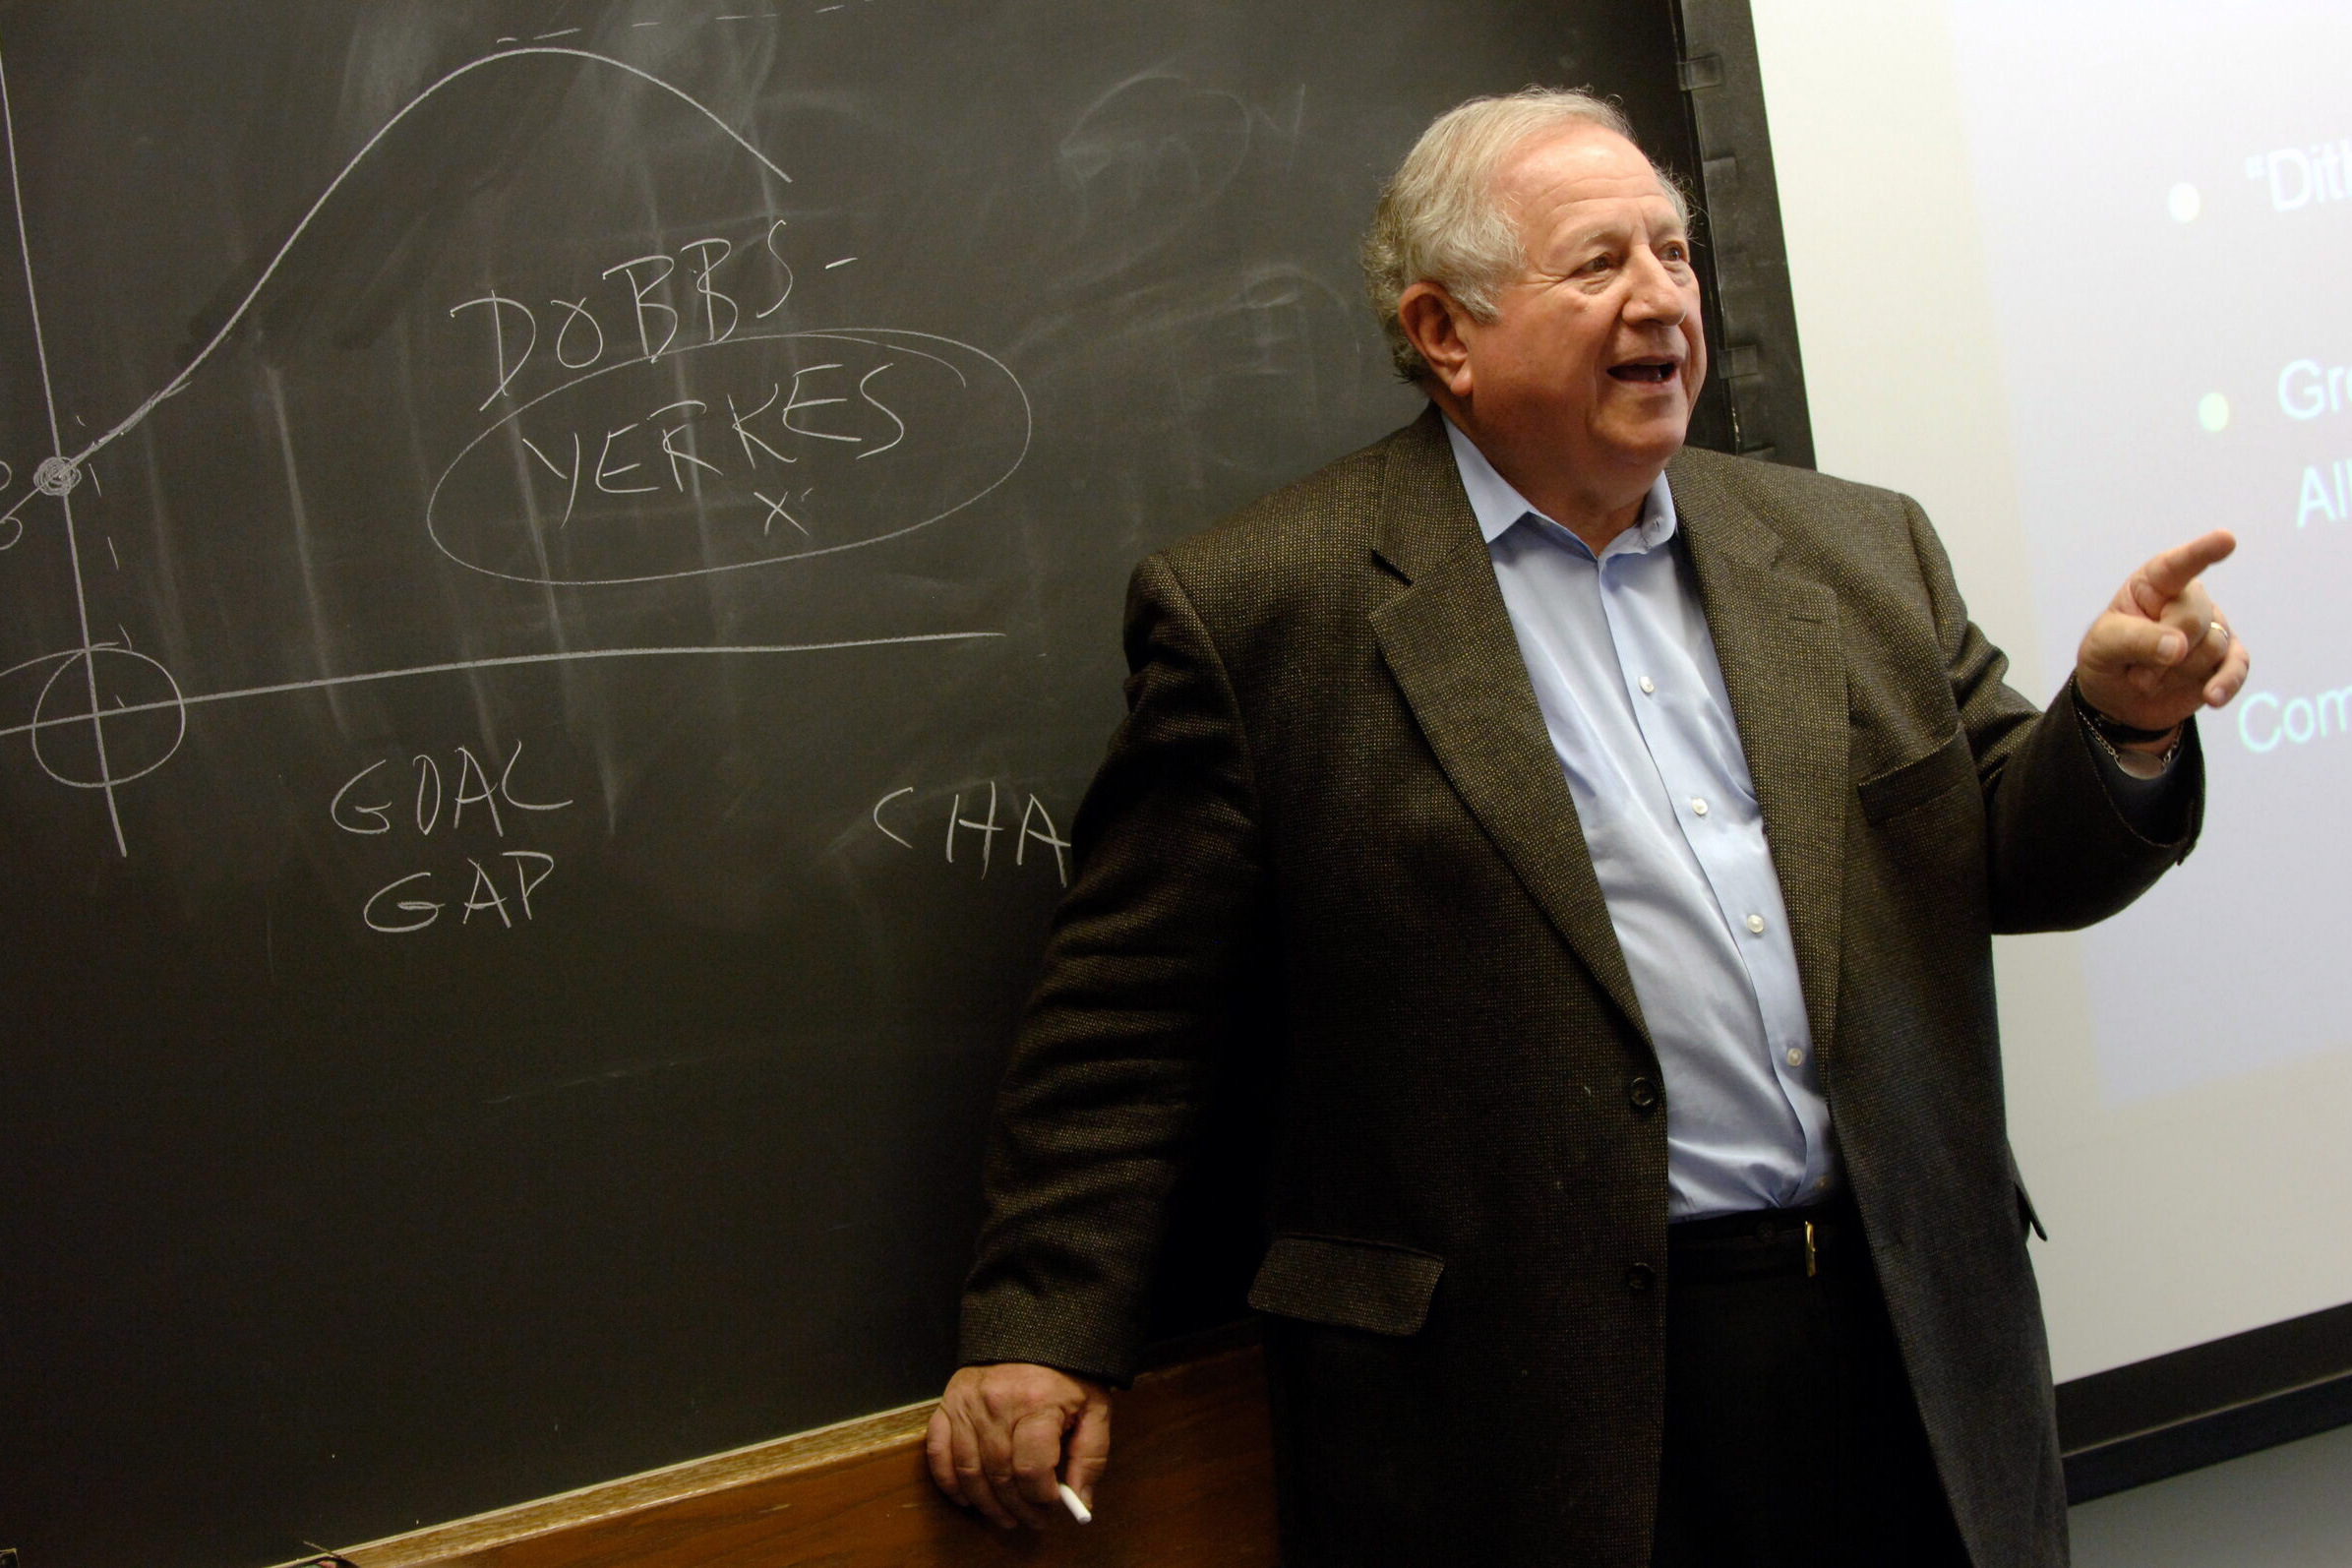 Edward Roberts, the David Sarnoff Professor of Management of Technology at the MIT Sloan School of Management, was a prolific scholar and mentor whose career at the Institute spanned seven decades.